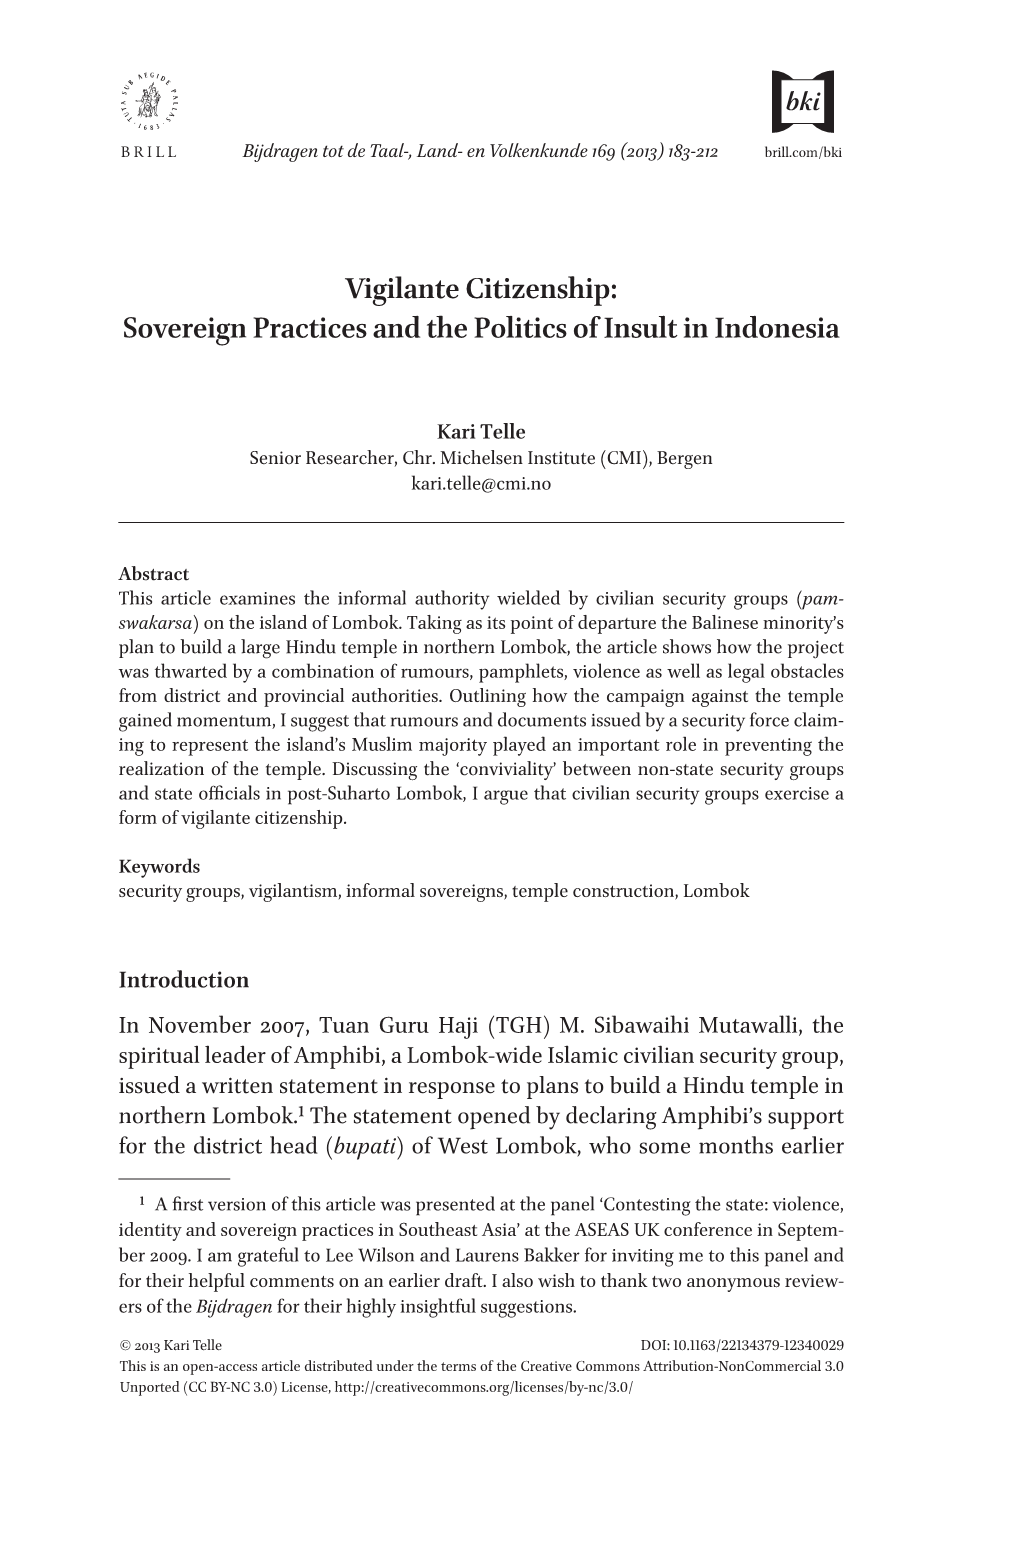 Sovereign Practices and the Politics of Insult in Indonesia